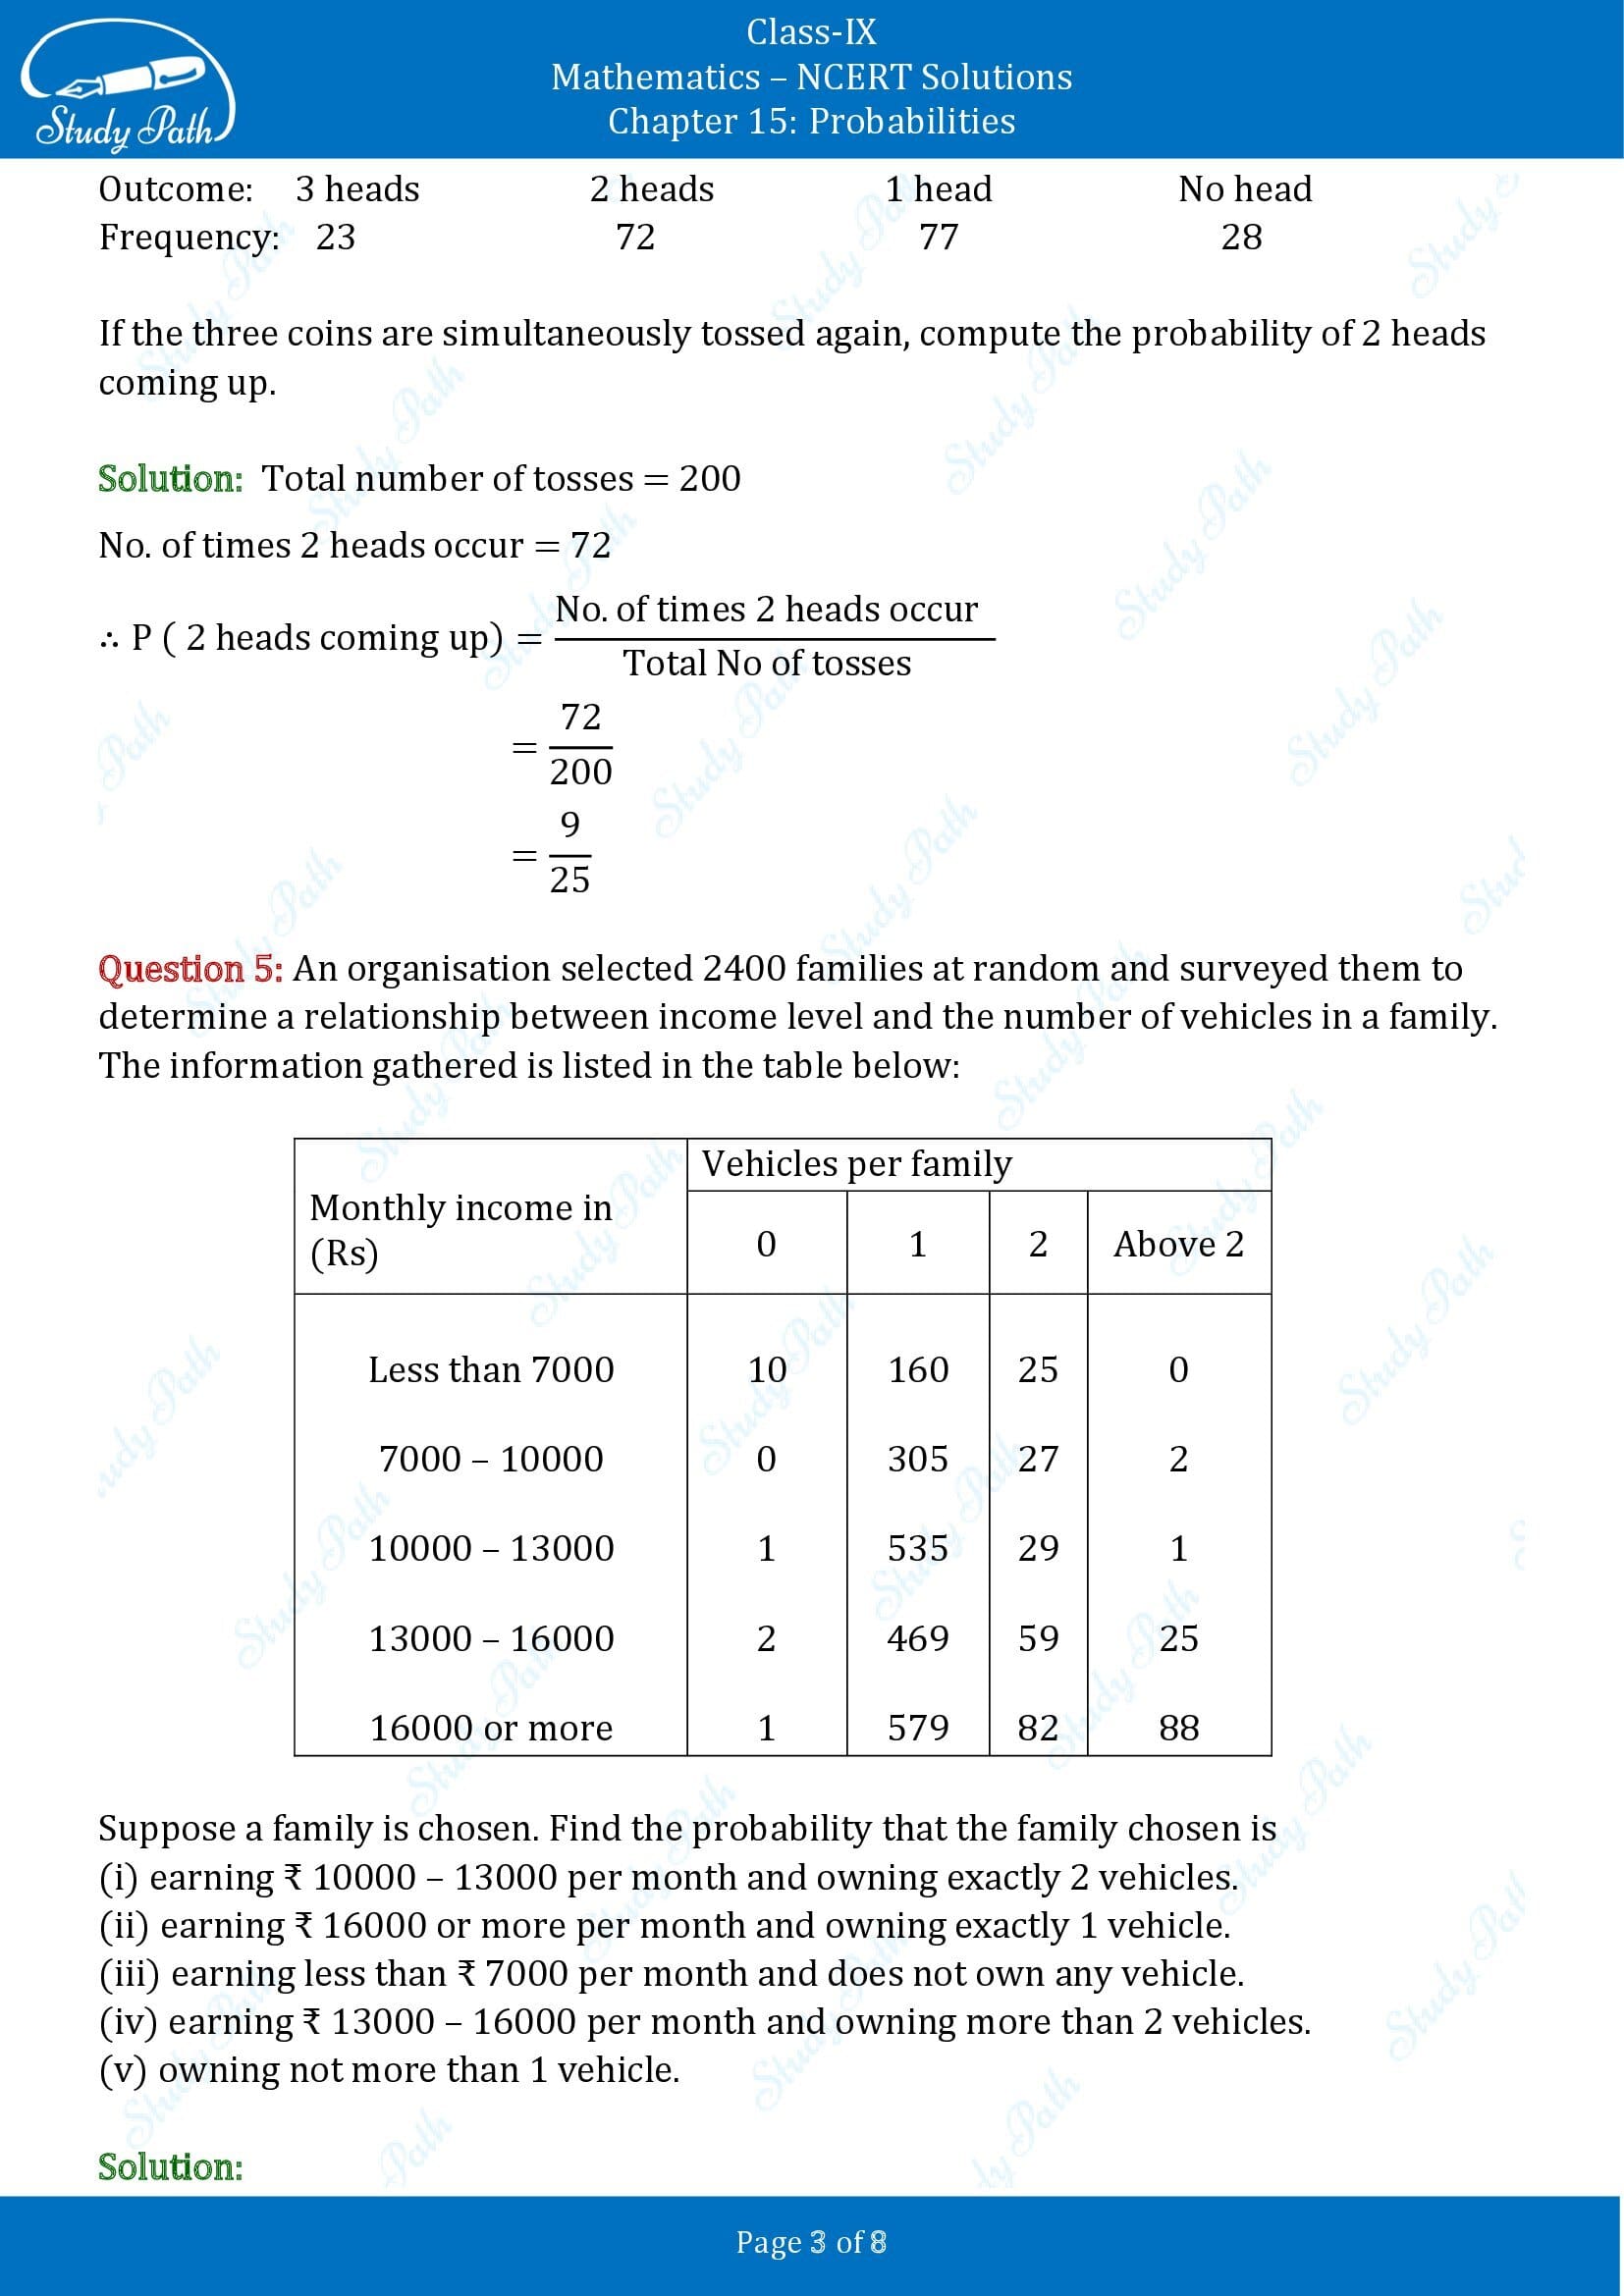 NCERT Solutions for Class 9 Maths Chapter 15 Probabilities 00003